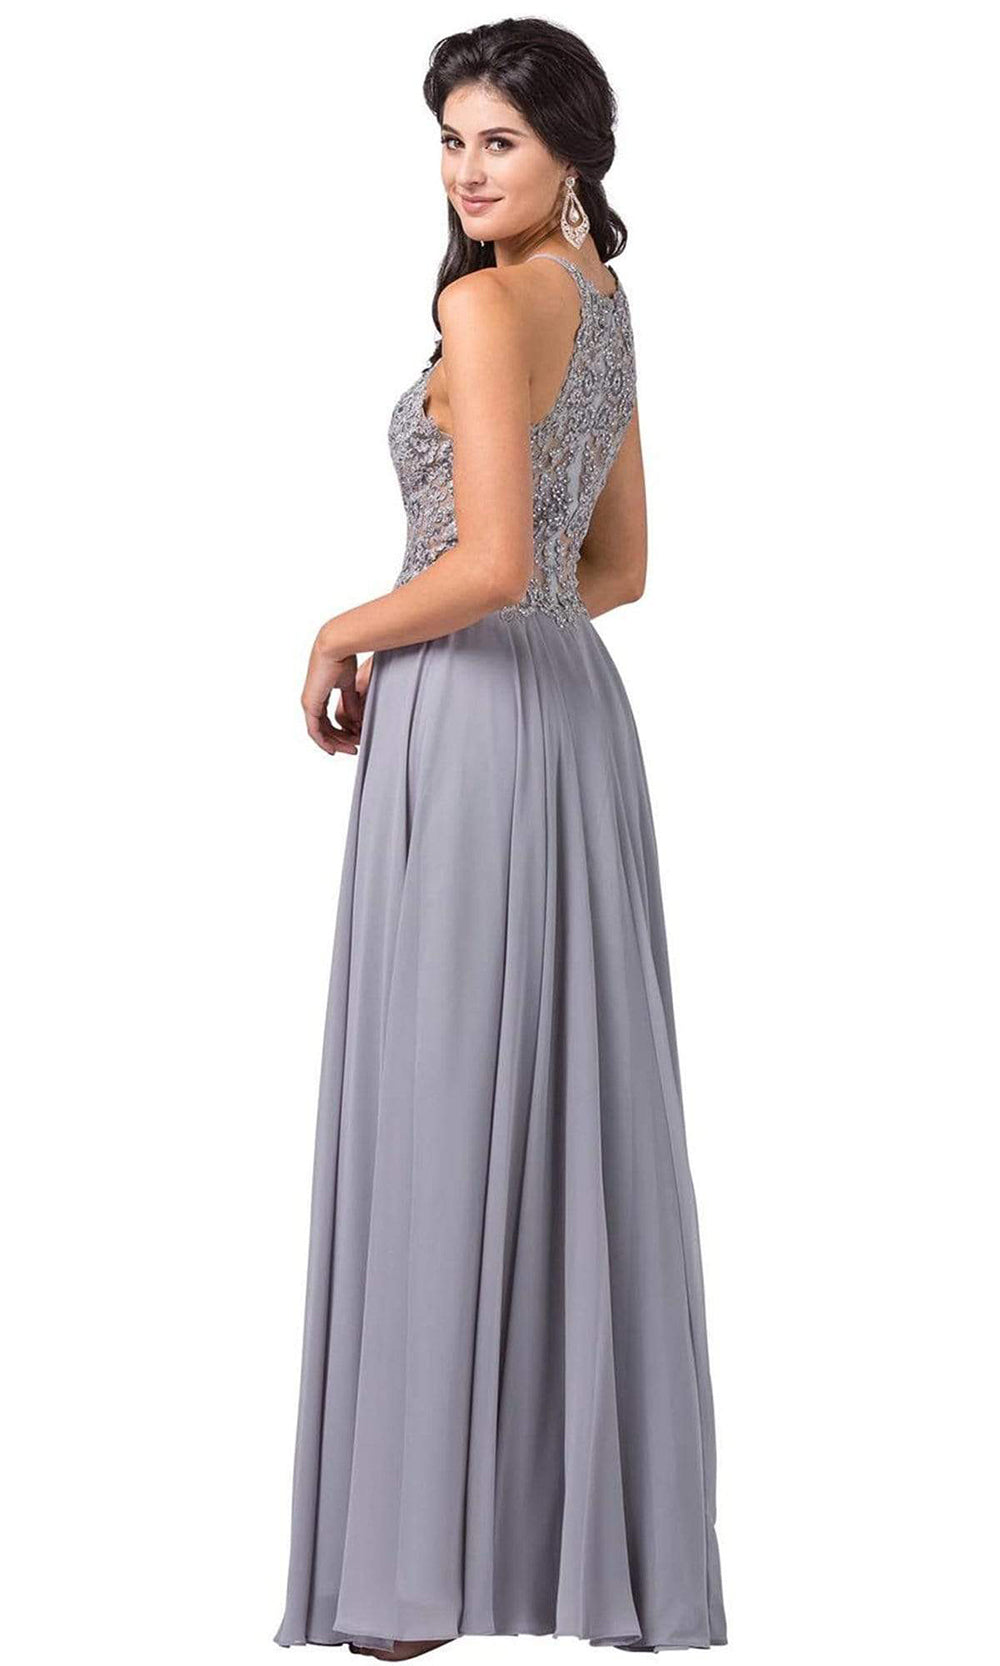 Dancing Queen - Halter Lace Applique A-line Dress 2716 - 1 pc Silver In Size XS Available CCSALE XS / Silver